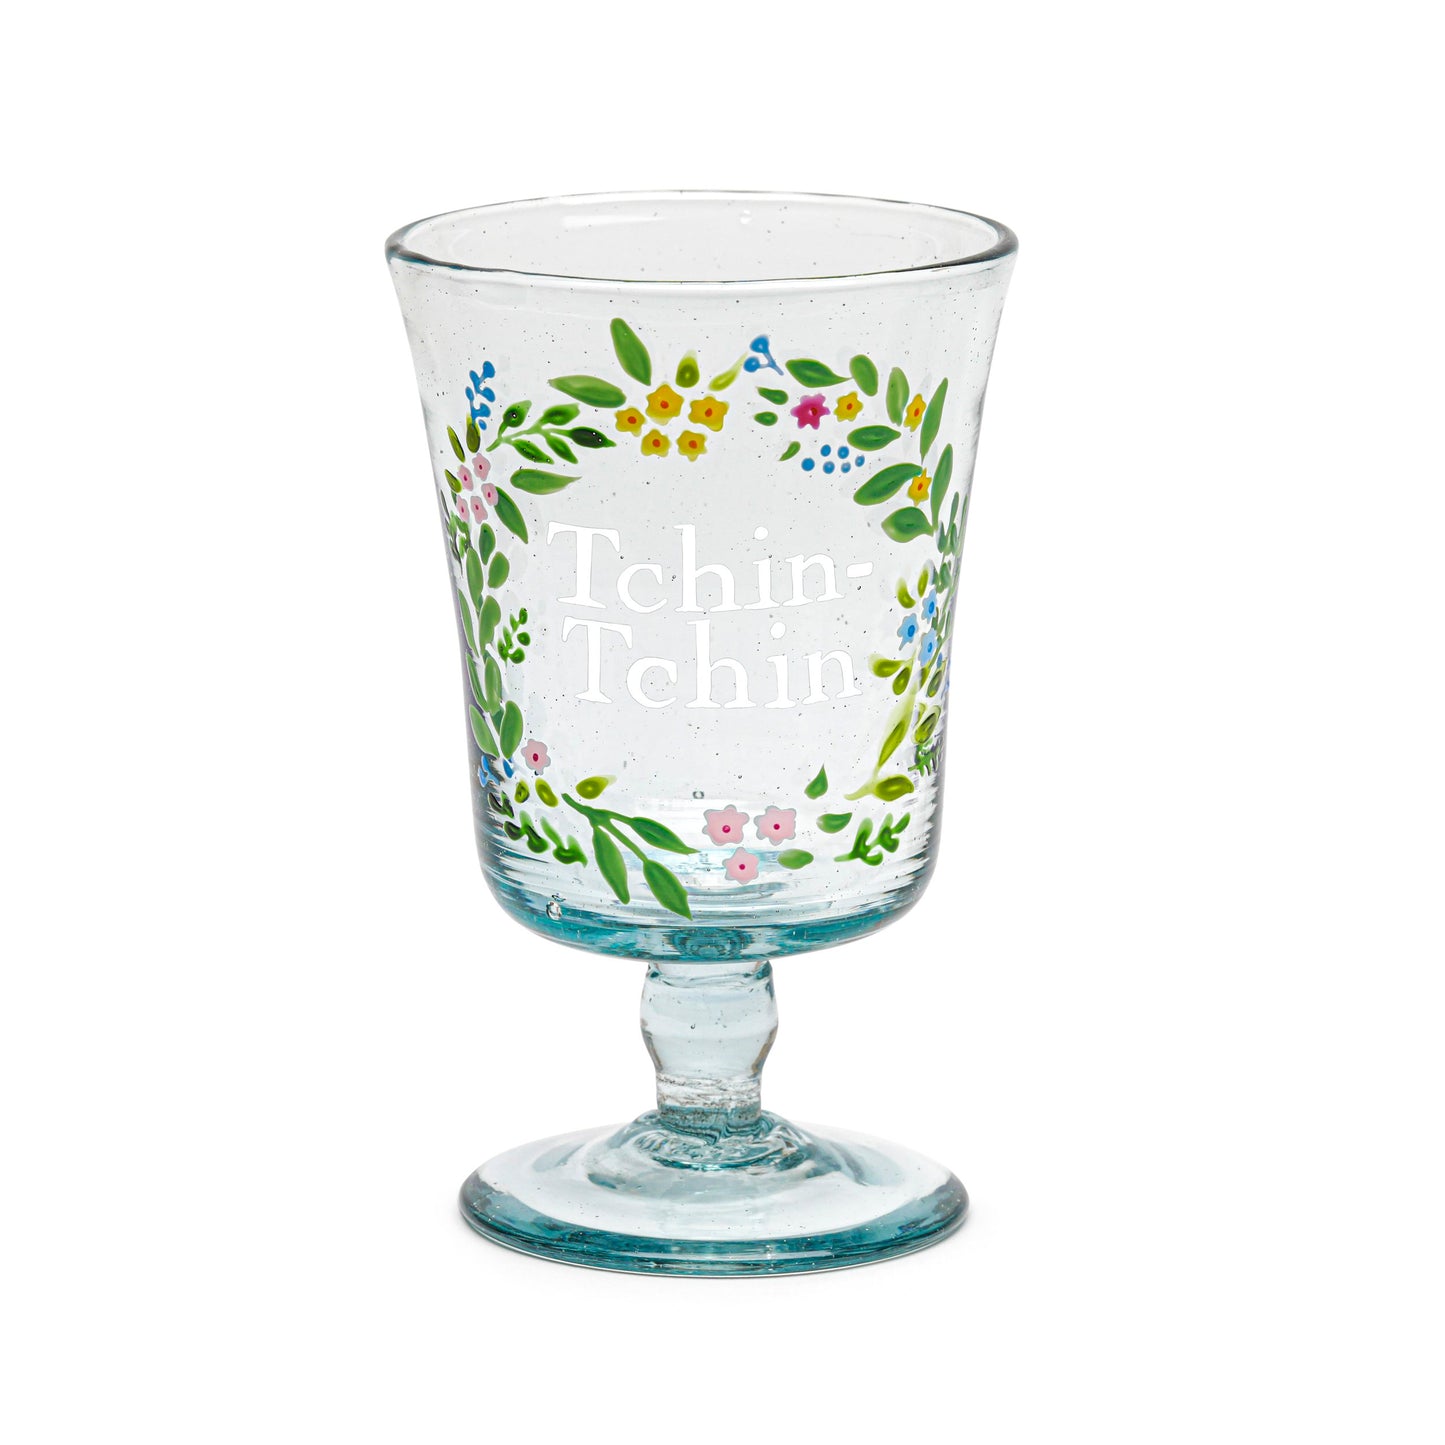 Hand Painted Wine Glass | CROWN OF FLOWERS: TCHIN-TCHIN